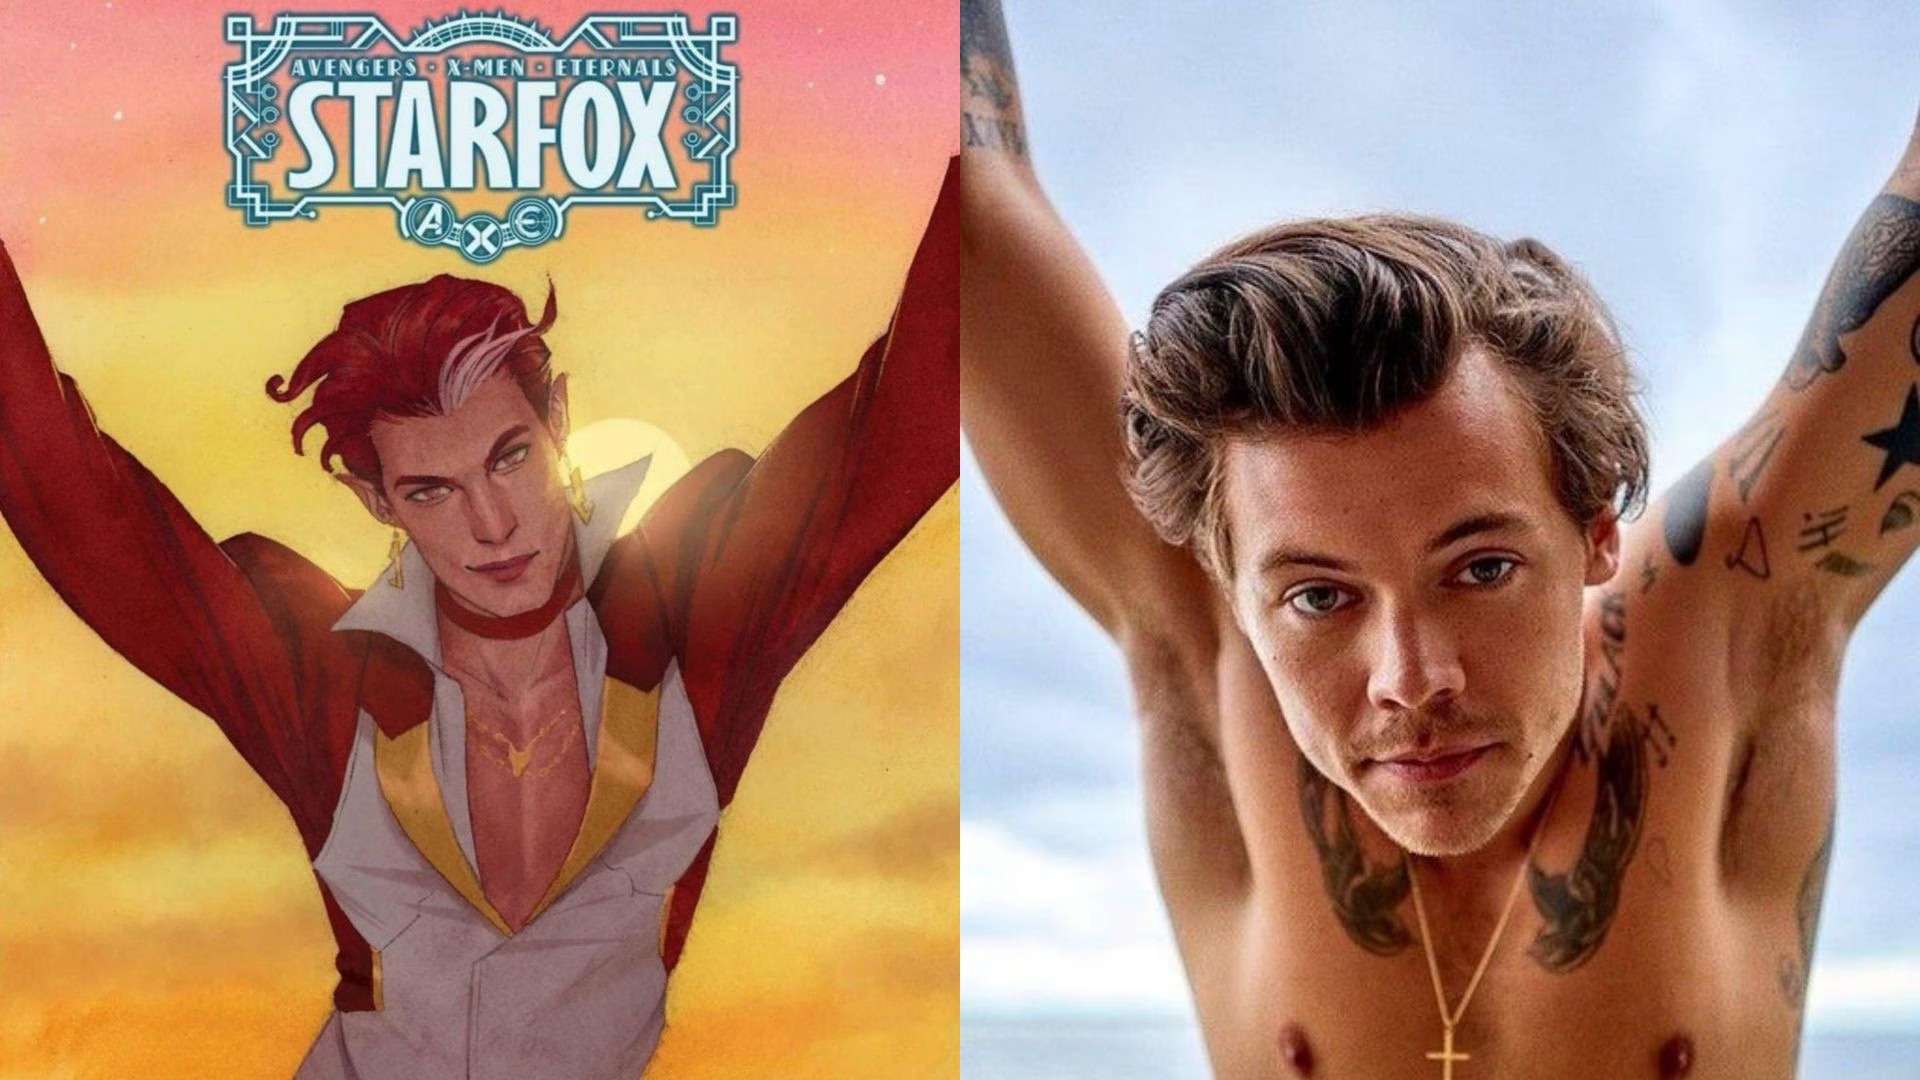 Starfox Explained: Who is Harry Styles Playing In the MCU? Is Starfox Really Thanos' Brother?